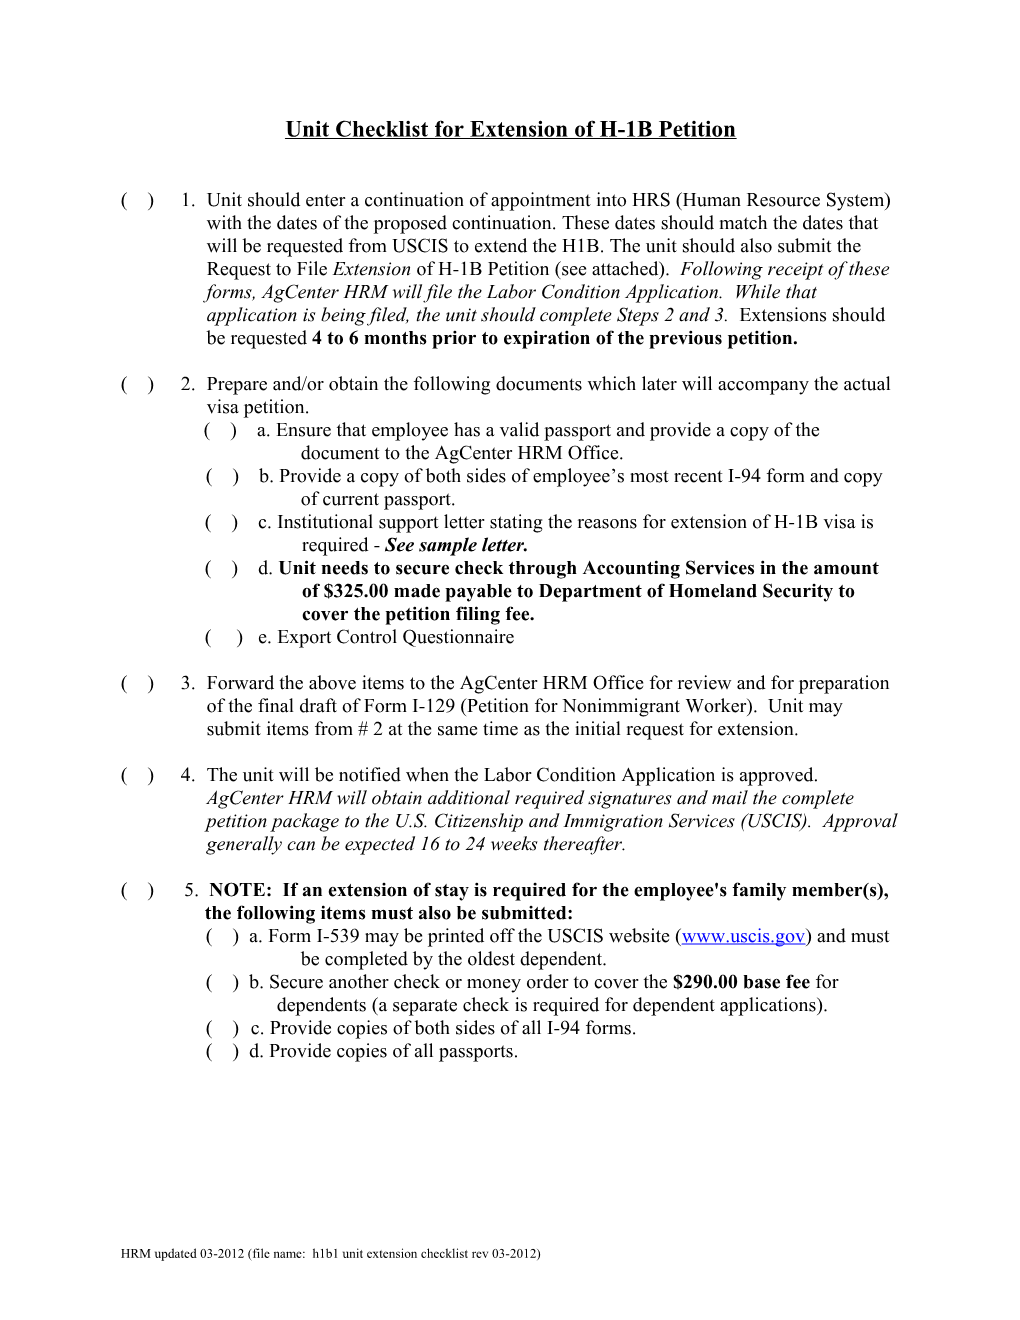 Unit Checklist for Extension of H-1B1 Petition